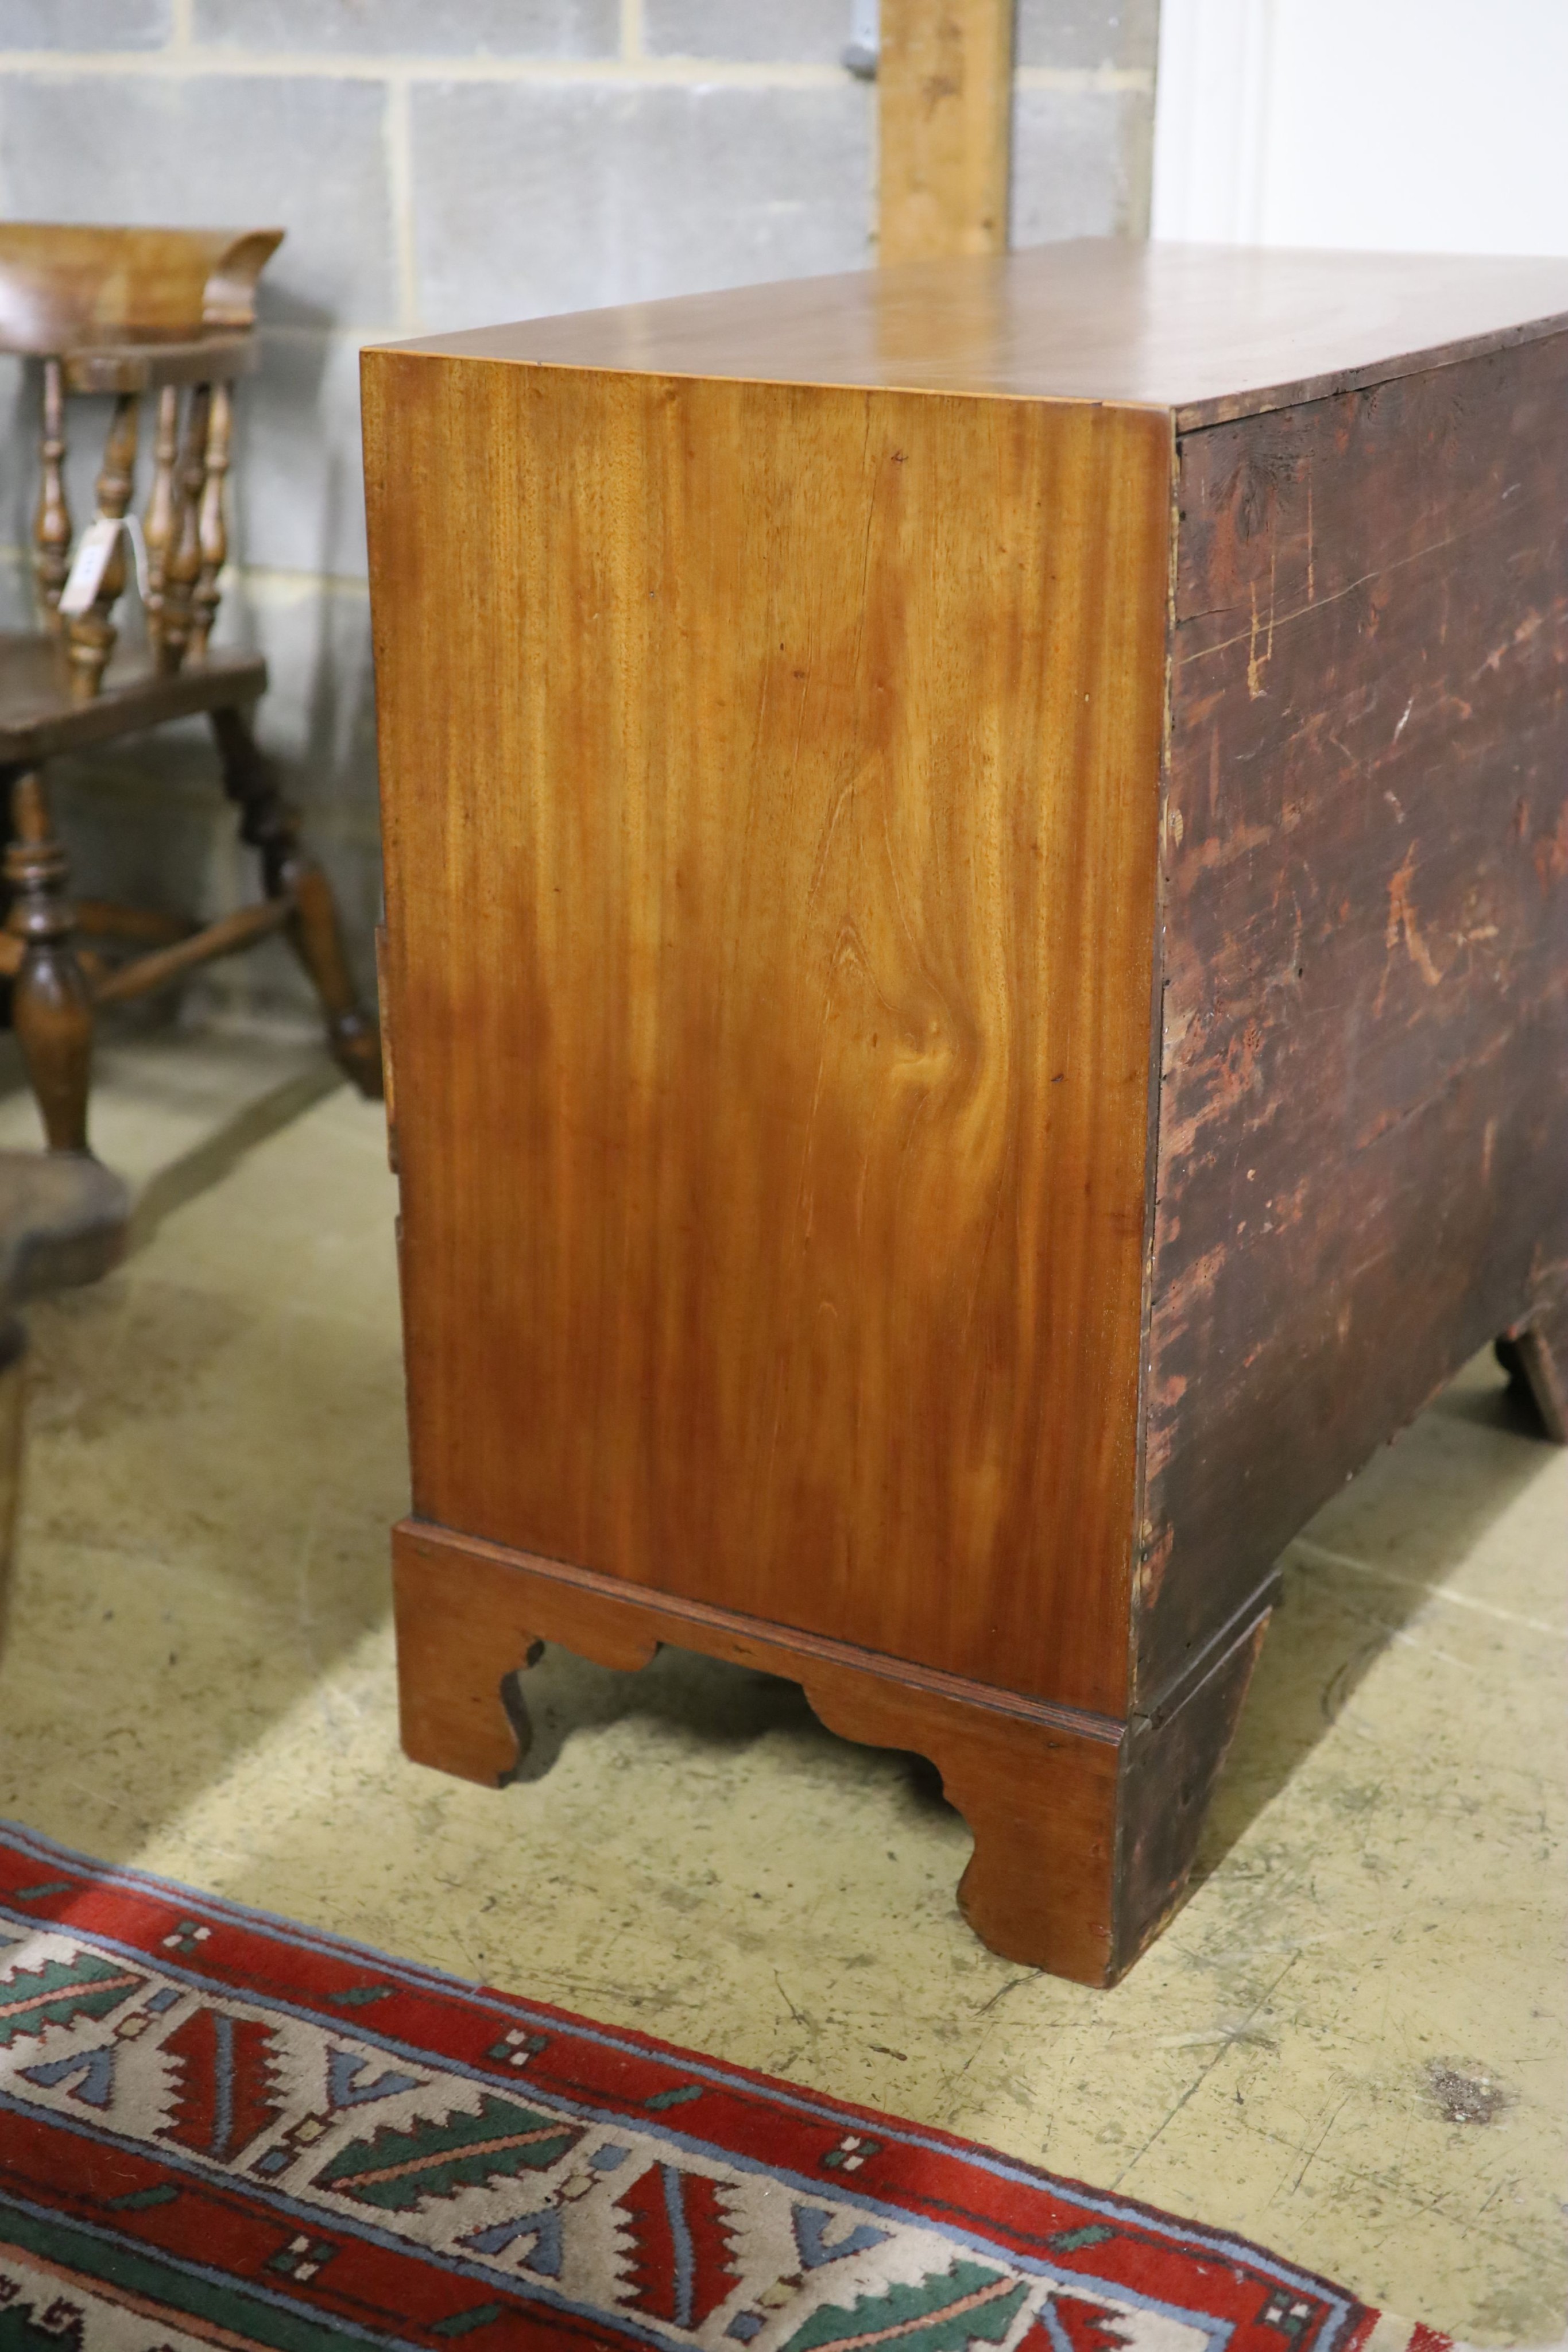 A small George IV mahogany four drawer chest, width 84cm, depth 45cm, height 82cm